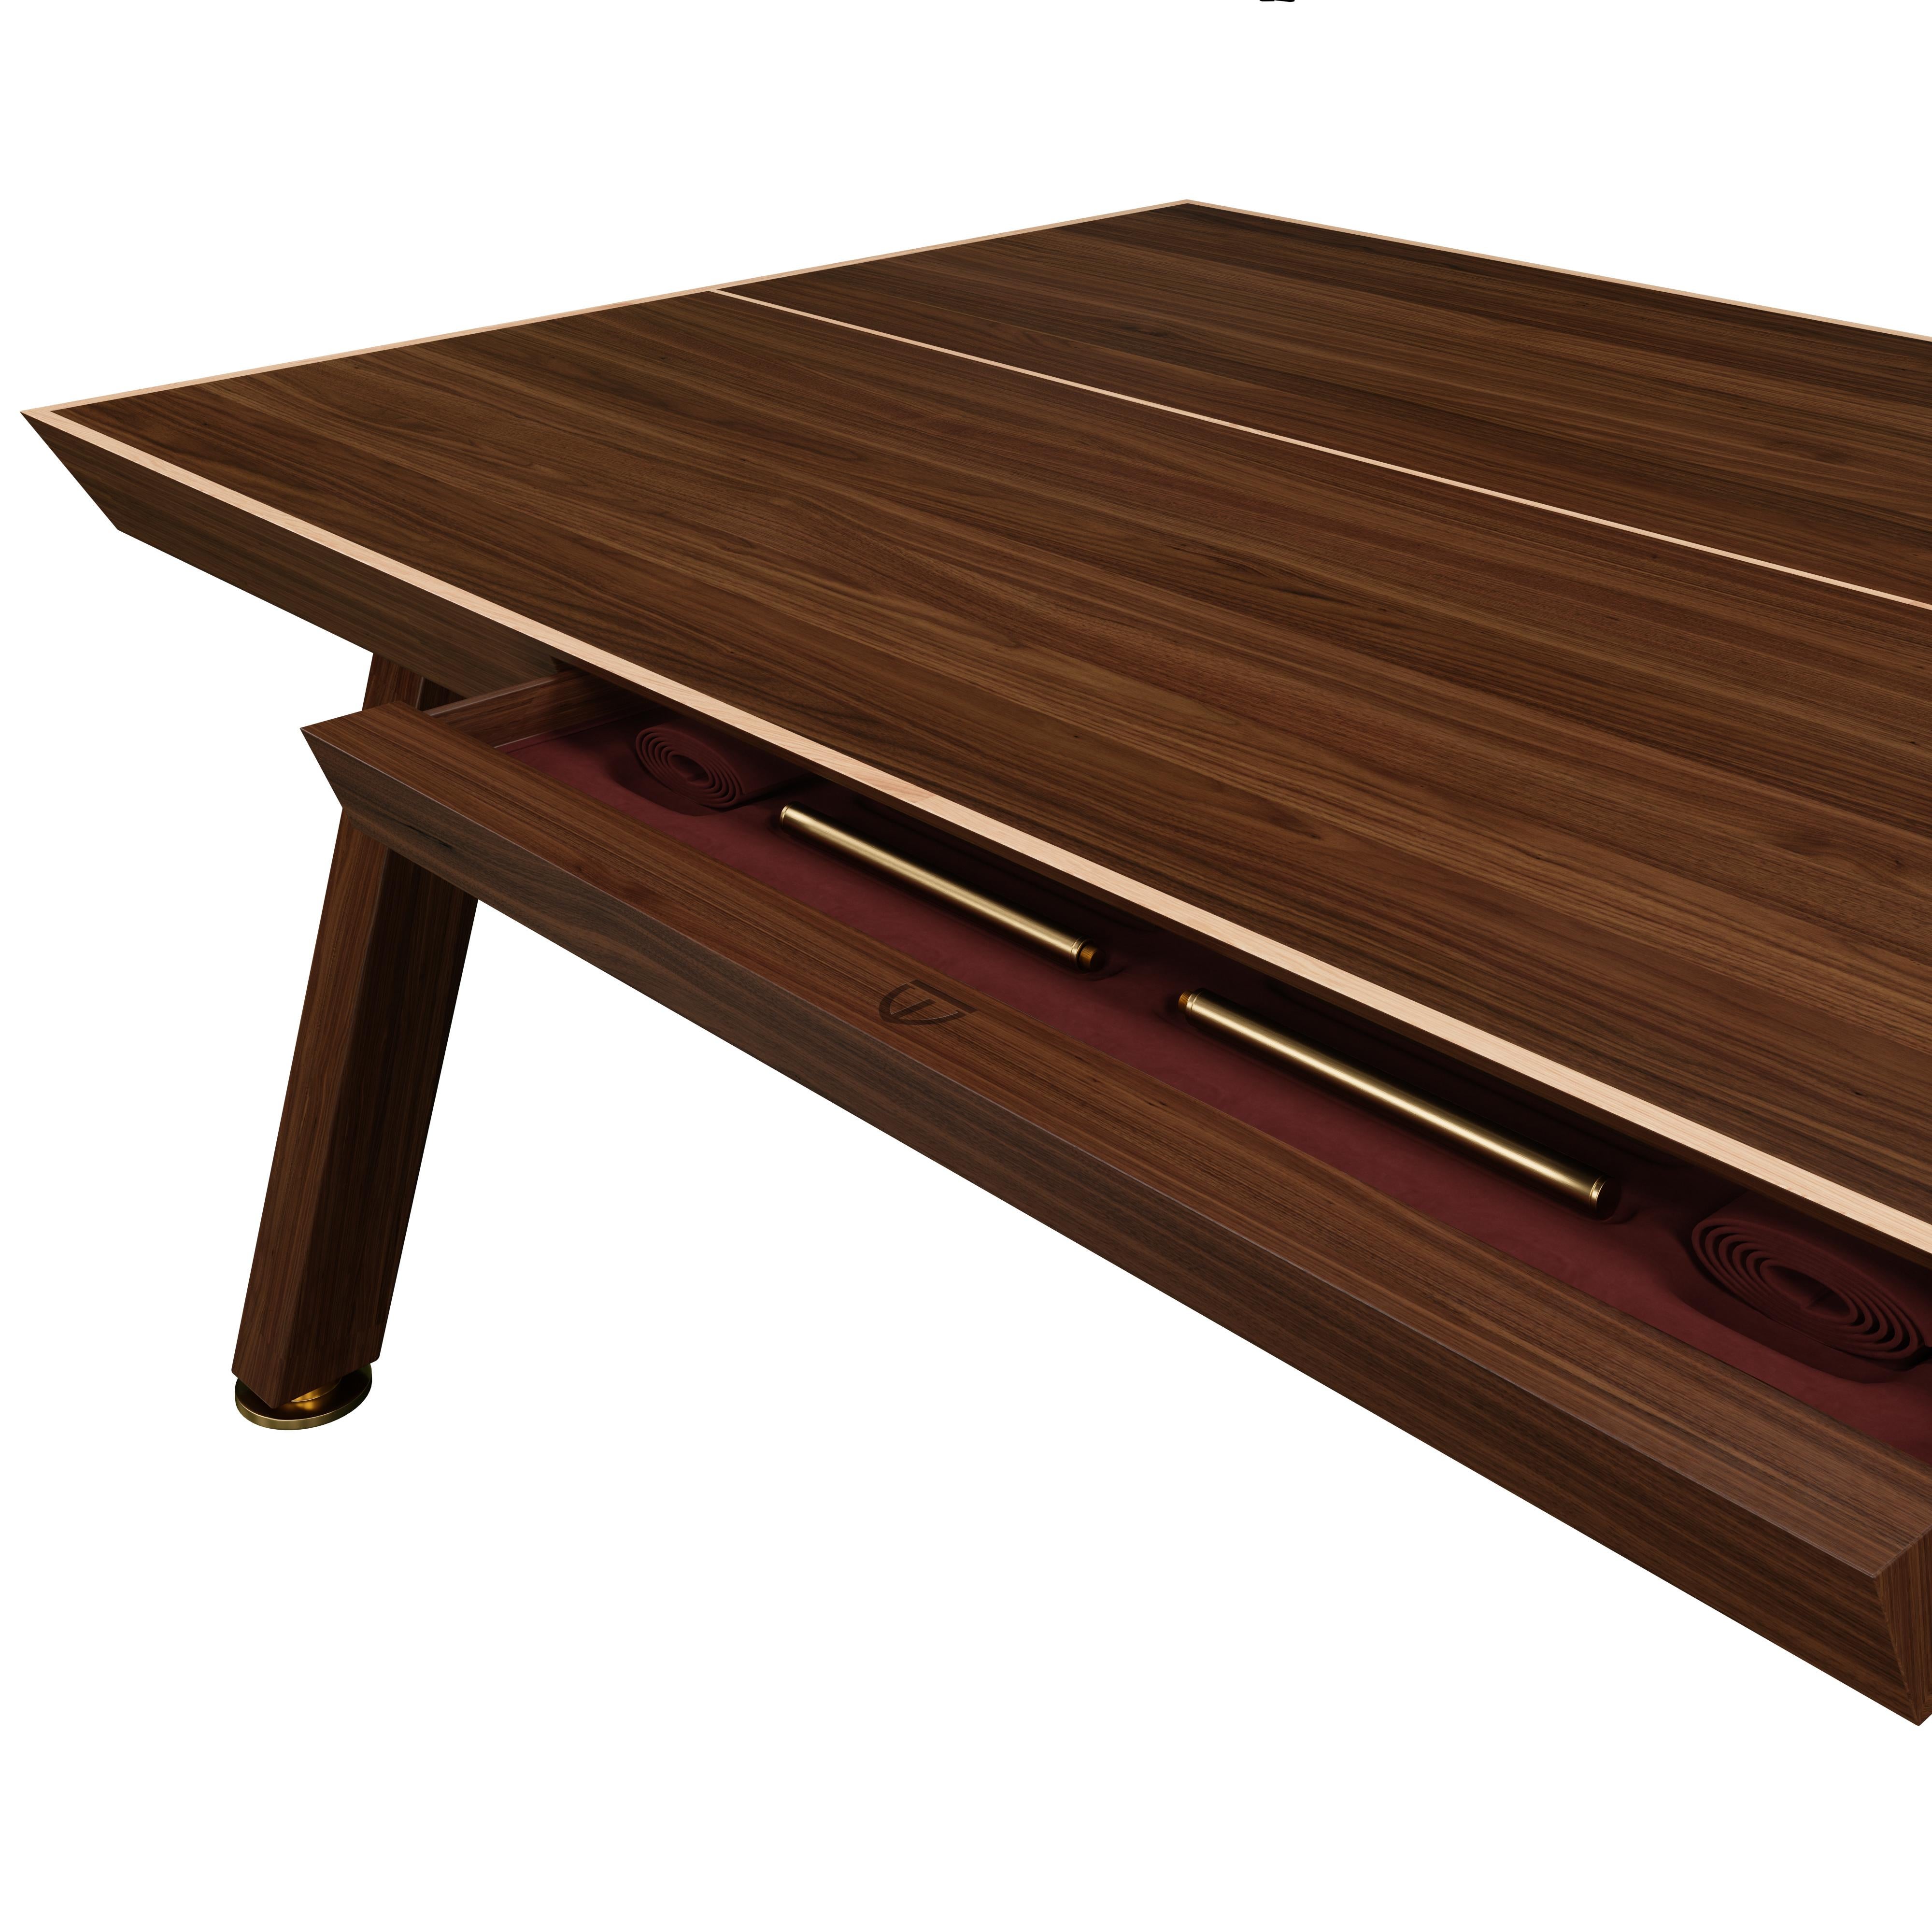 Contemporary 21st Century Keppel Ping Pong Table Walnut Wood Leather Oak For Sale